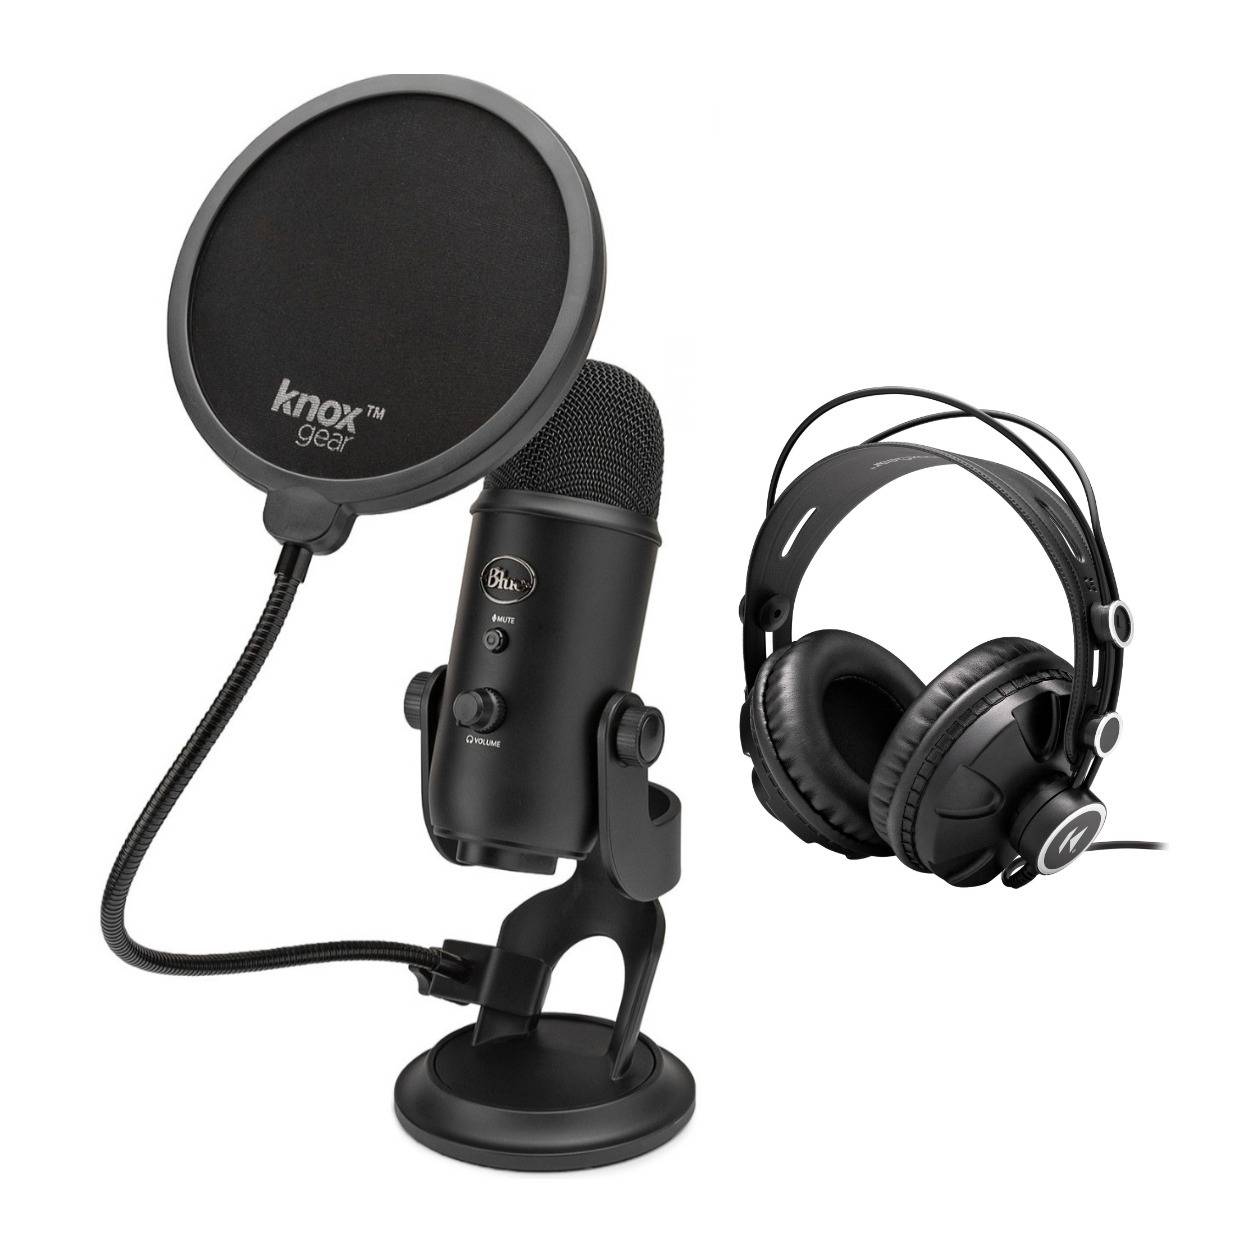 Blue Yeti USB Microphone (Blackout) with Knox Gear Headphones and Pop Filter